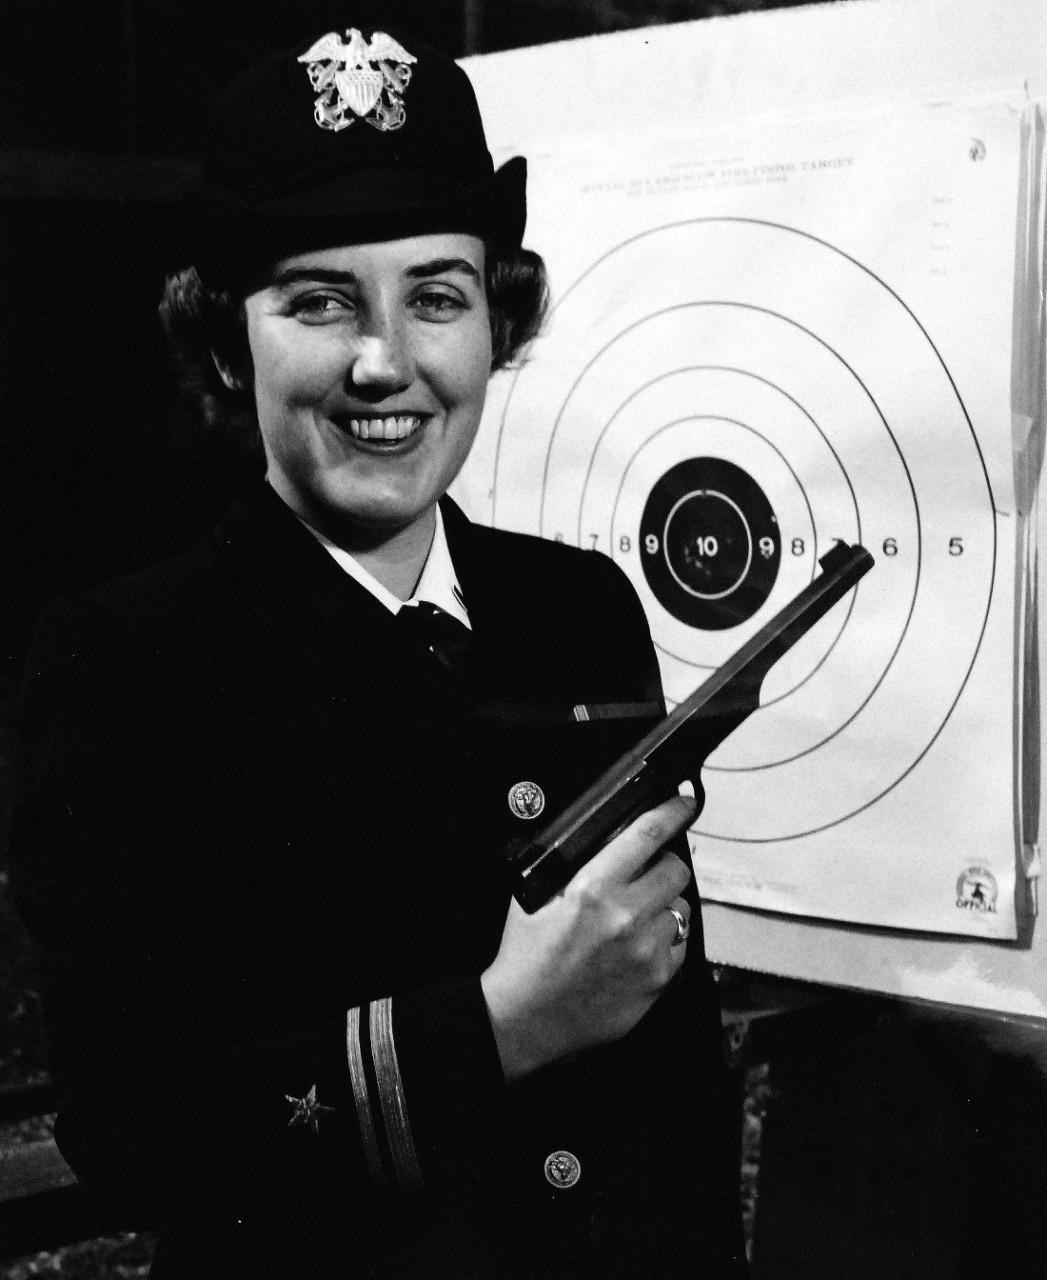 USN 709565:   U.S. Navy WAVE Lieutenant (Junior Grade) Nancy Jane Ellifrit, March 1956.   Ellifrit displays her shooting ability at the Park Police Range in Washington before departing for the National Mid-Winter Pistol Meet at Tampa, Florida that March.    Lieutenant Ellifrit was the only WAVE participating in the meet.  She has been shooting since she joined the U.S. Navy in August 1952 and is qualified in 22, 38, and 45-caliber pistols.   She has attended the Nationals for the past three  years as a member of a Bureau of Ordnance Team composed of these WAVES and a the wife of a U.S. Navy Commander.   Ellifrit won the Virginia State Women’s Championship the last year.   Photograph released March 7, 1956.   Official U.S. Navy photograph, now in the collections of the National Archives.   